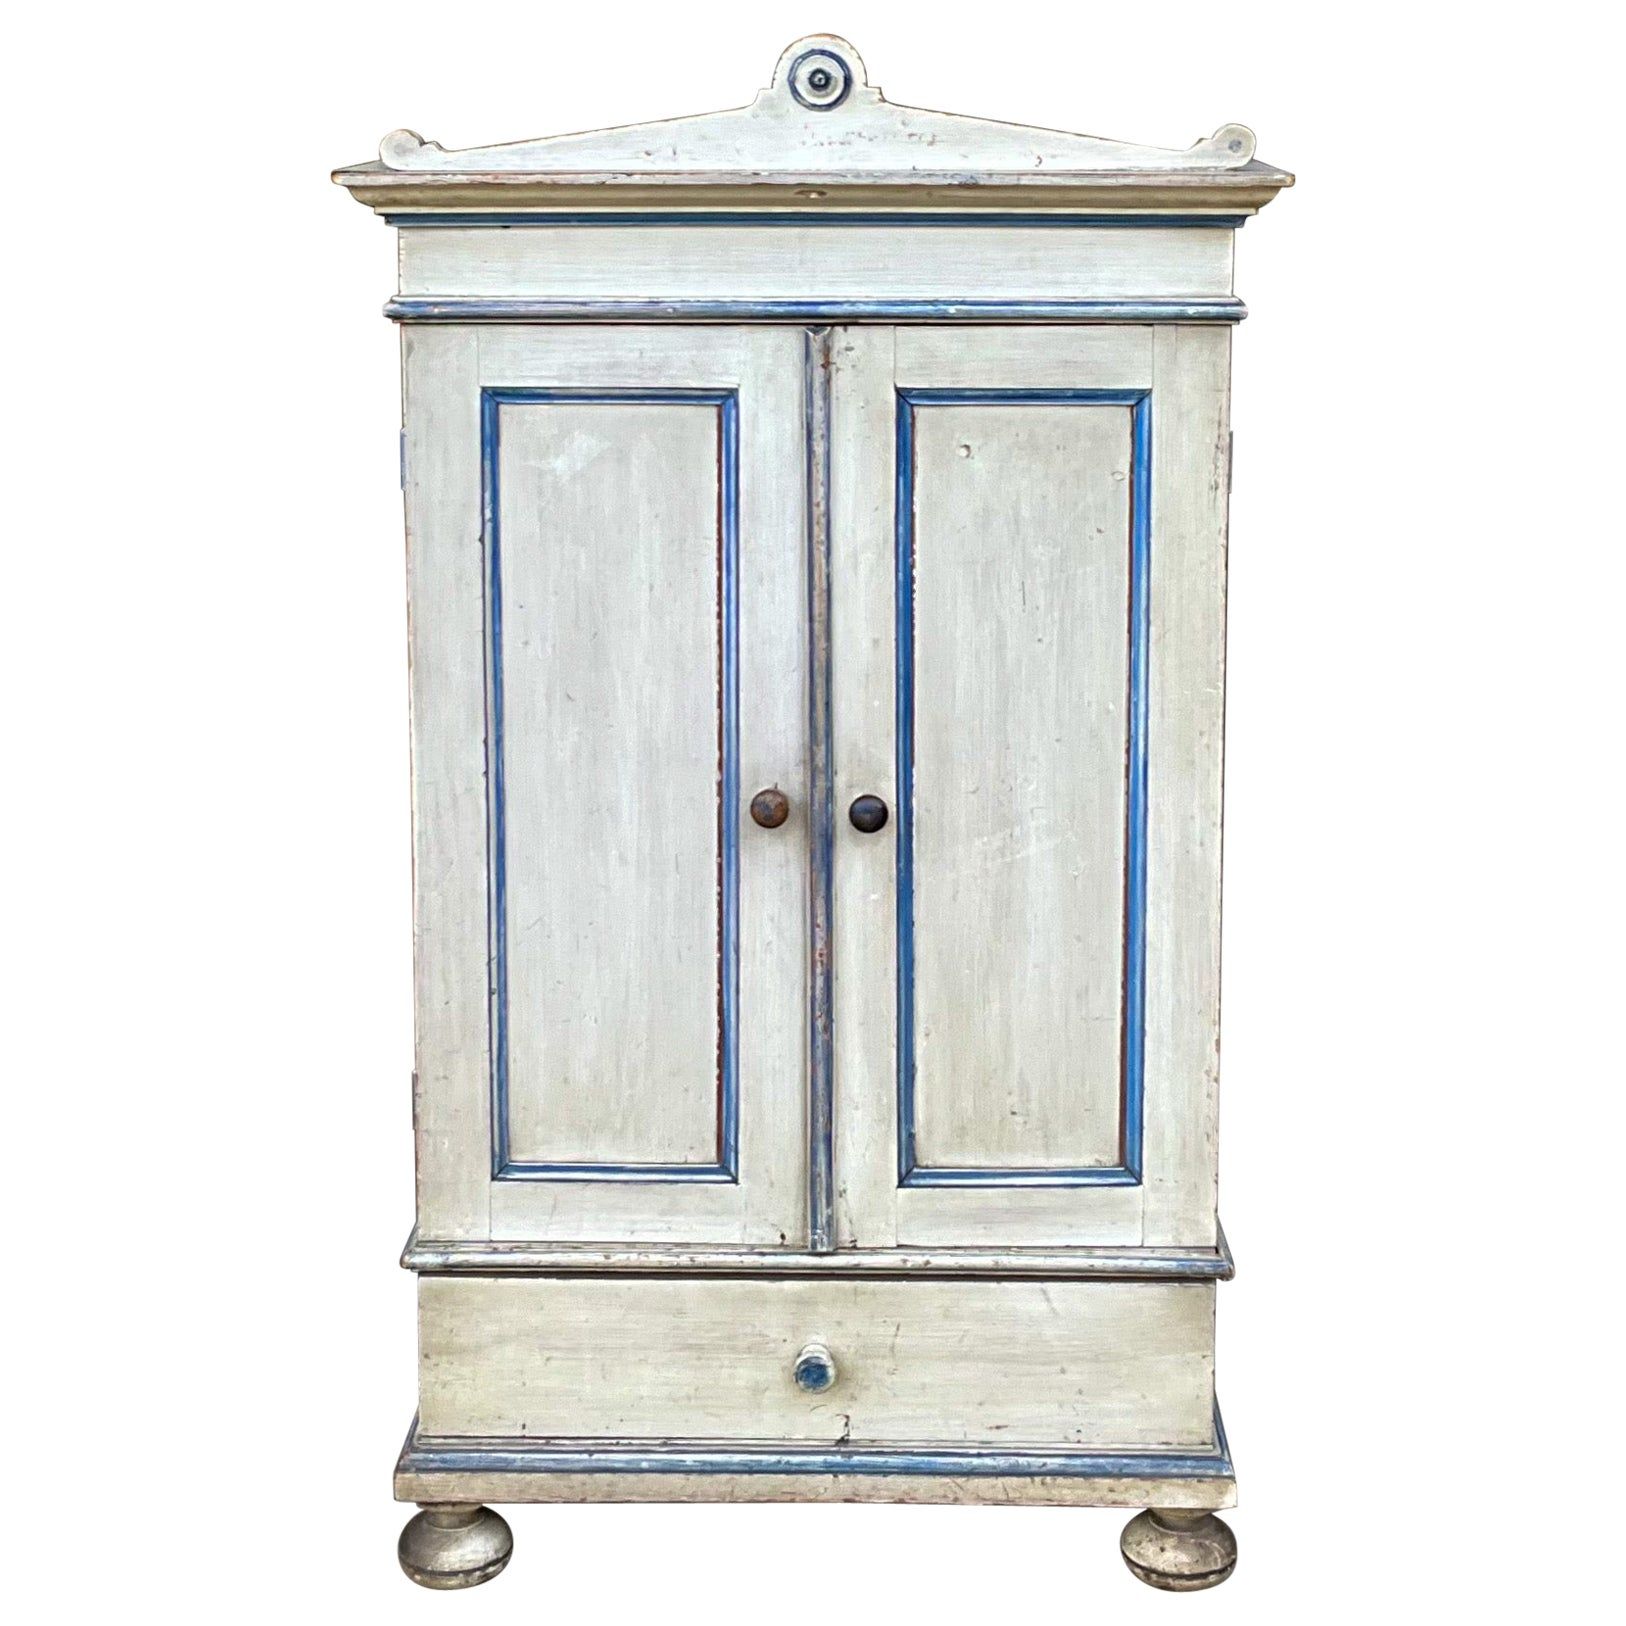 Antique And Vintage Wardrobes And Armoires – 2,374 For Sale At 1stdibs | Antique  Armoire, Antique Wardrobe Armoires, Antique French Armoire In Cheap Vintage Wardrobes (Photo 13 of 15)